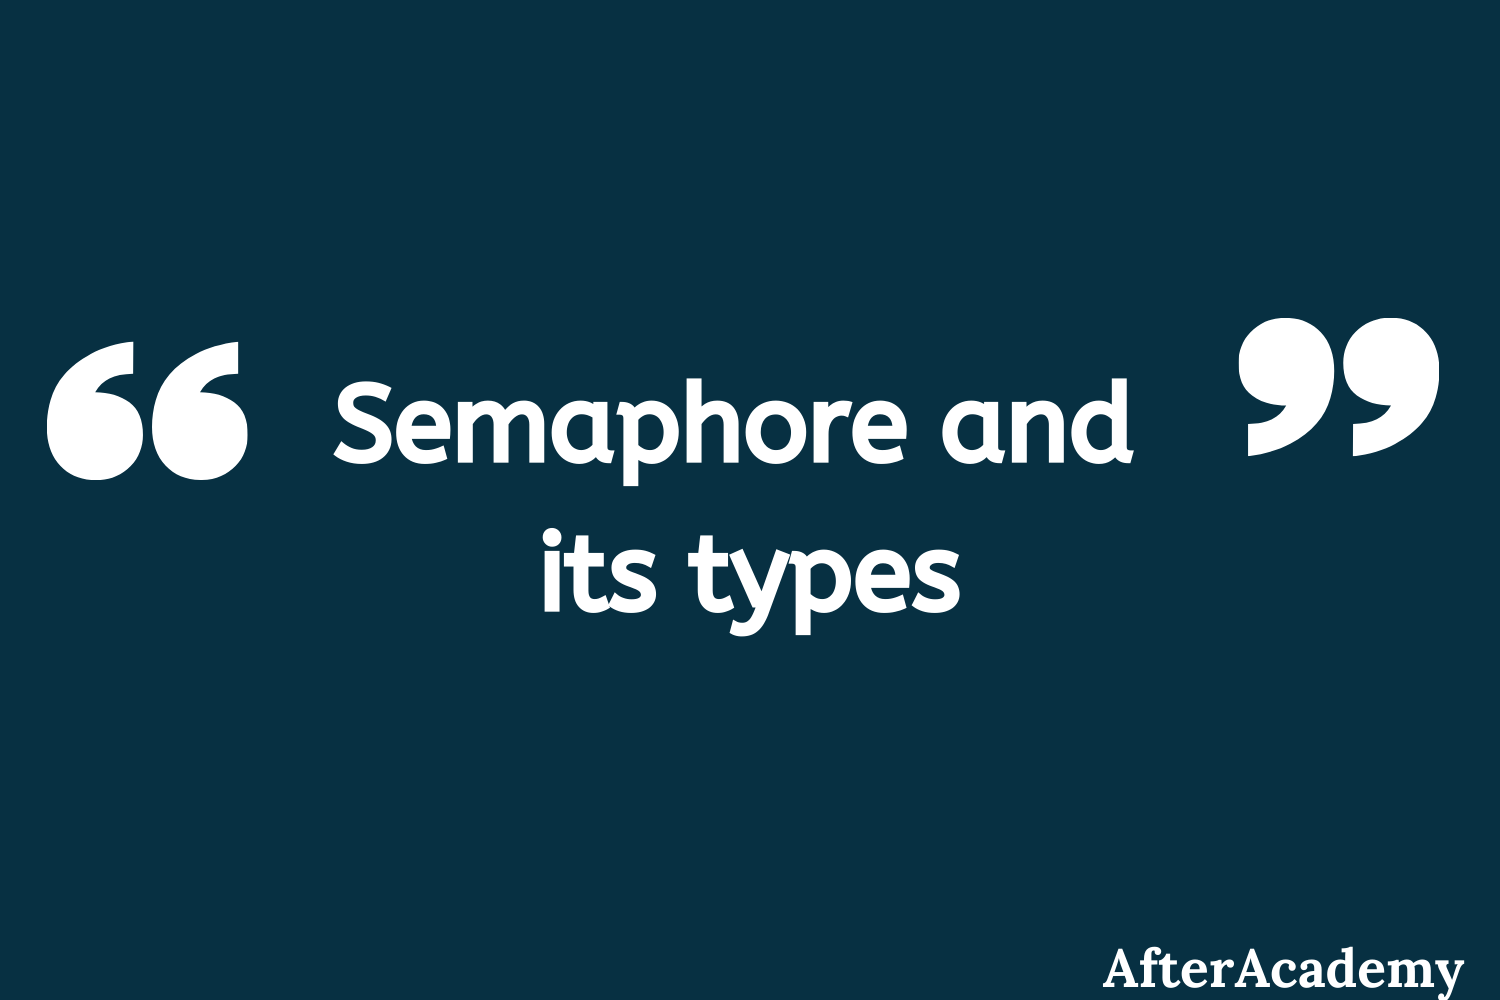 What is semaphore and what are its types?